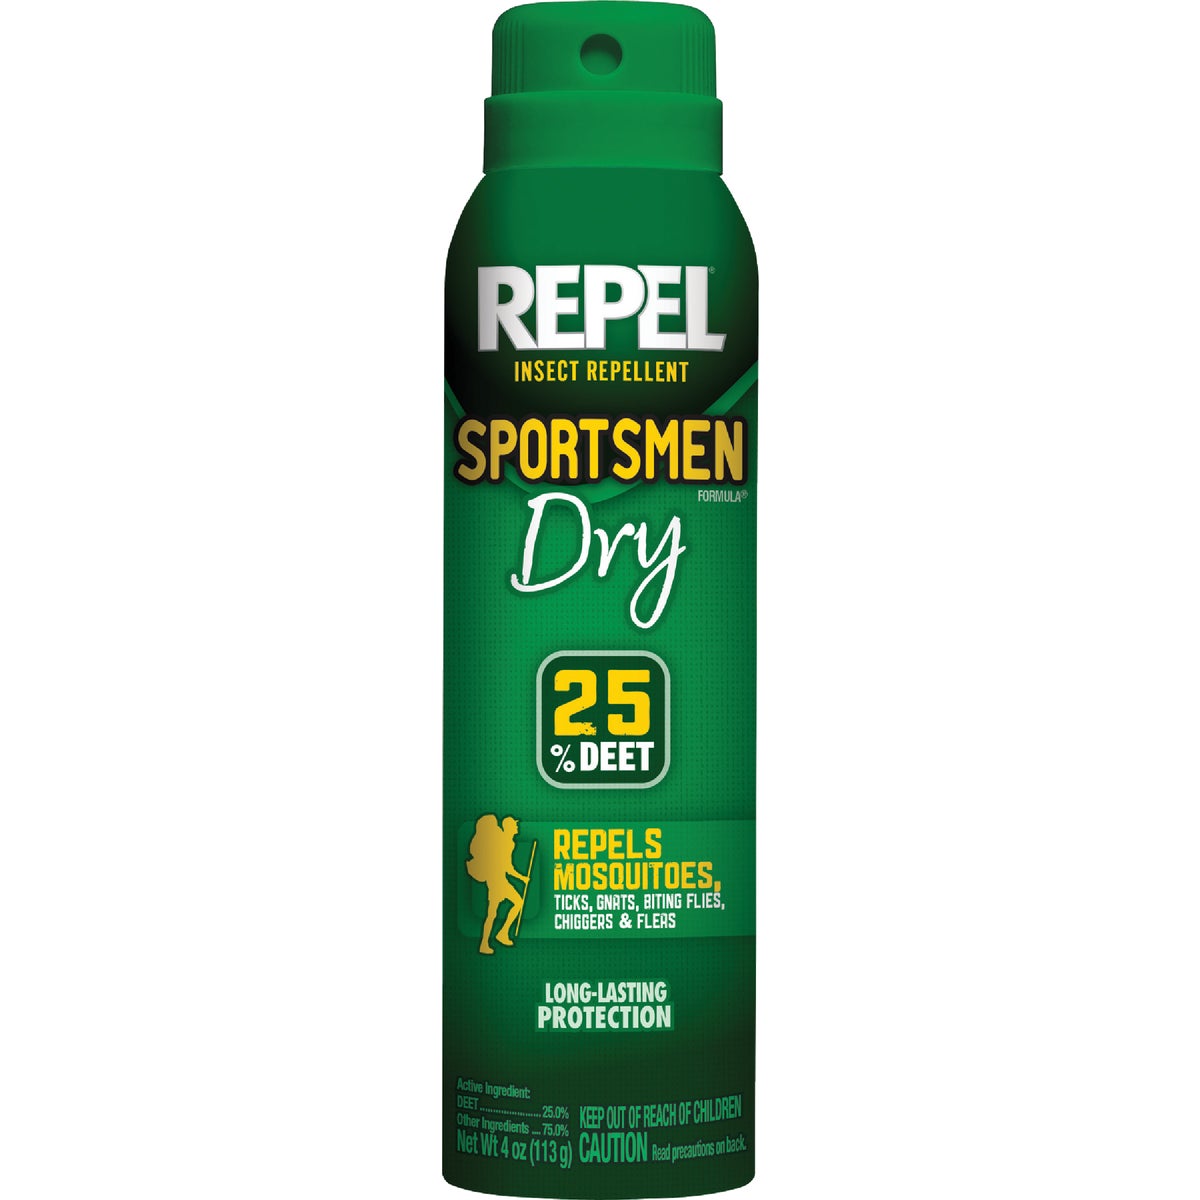 Item 702166, Repel Sportsmen Dry mosquito repellent. Not oily or greasy.